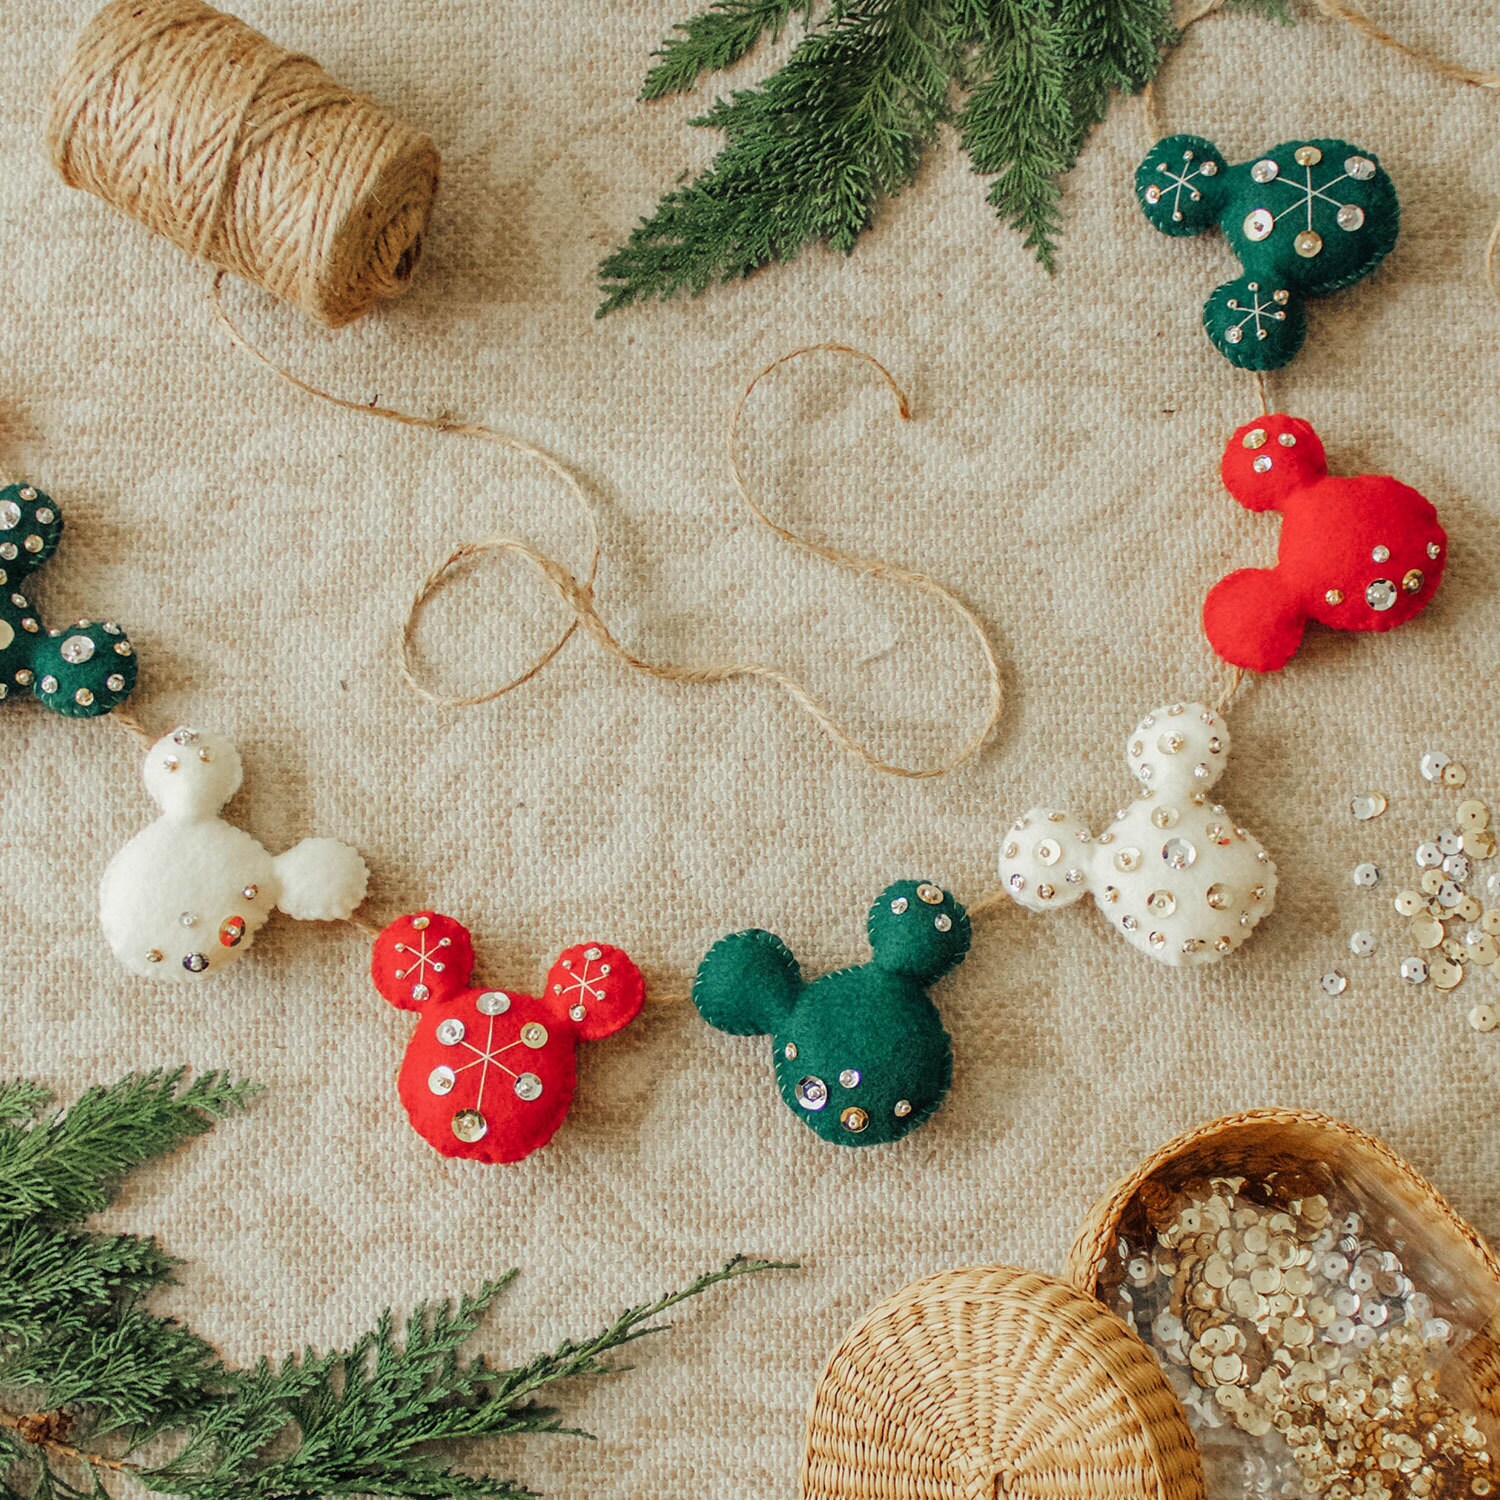 Off-white, red, and green felt Mickey Mouse heads decorated with sequins and beads strung together to form a holiday garland.